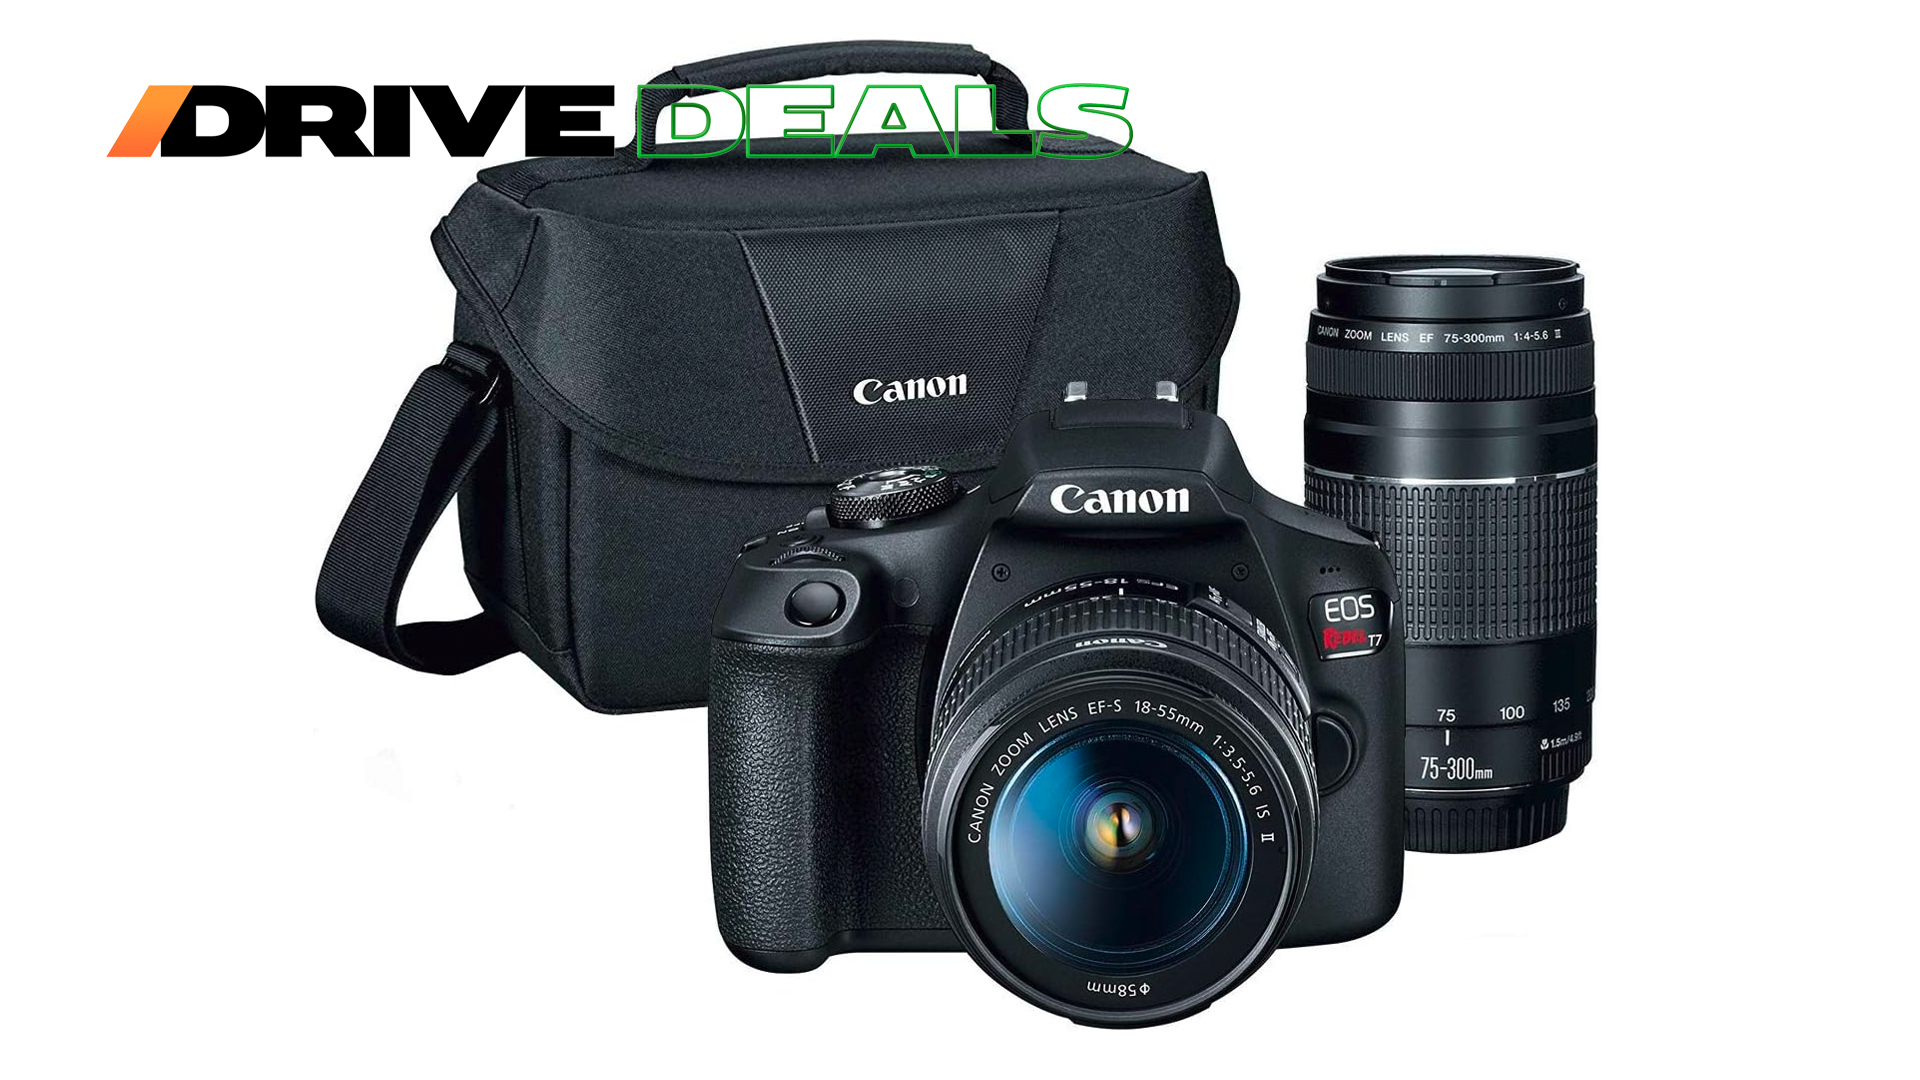 Grab a Steeply Discounted DSLR Camera on Amazon Right Now